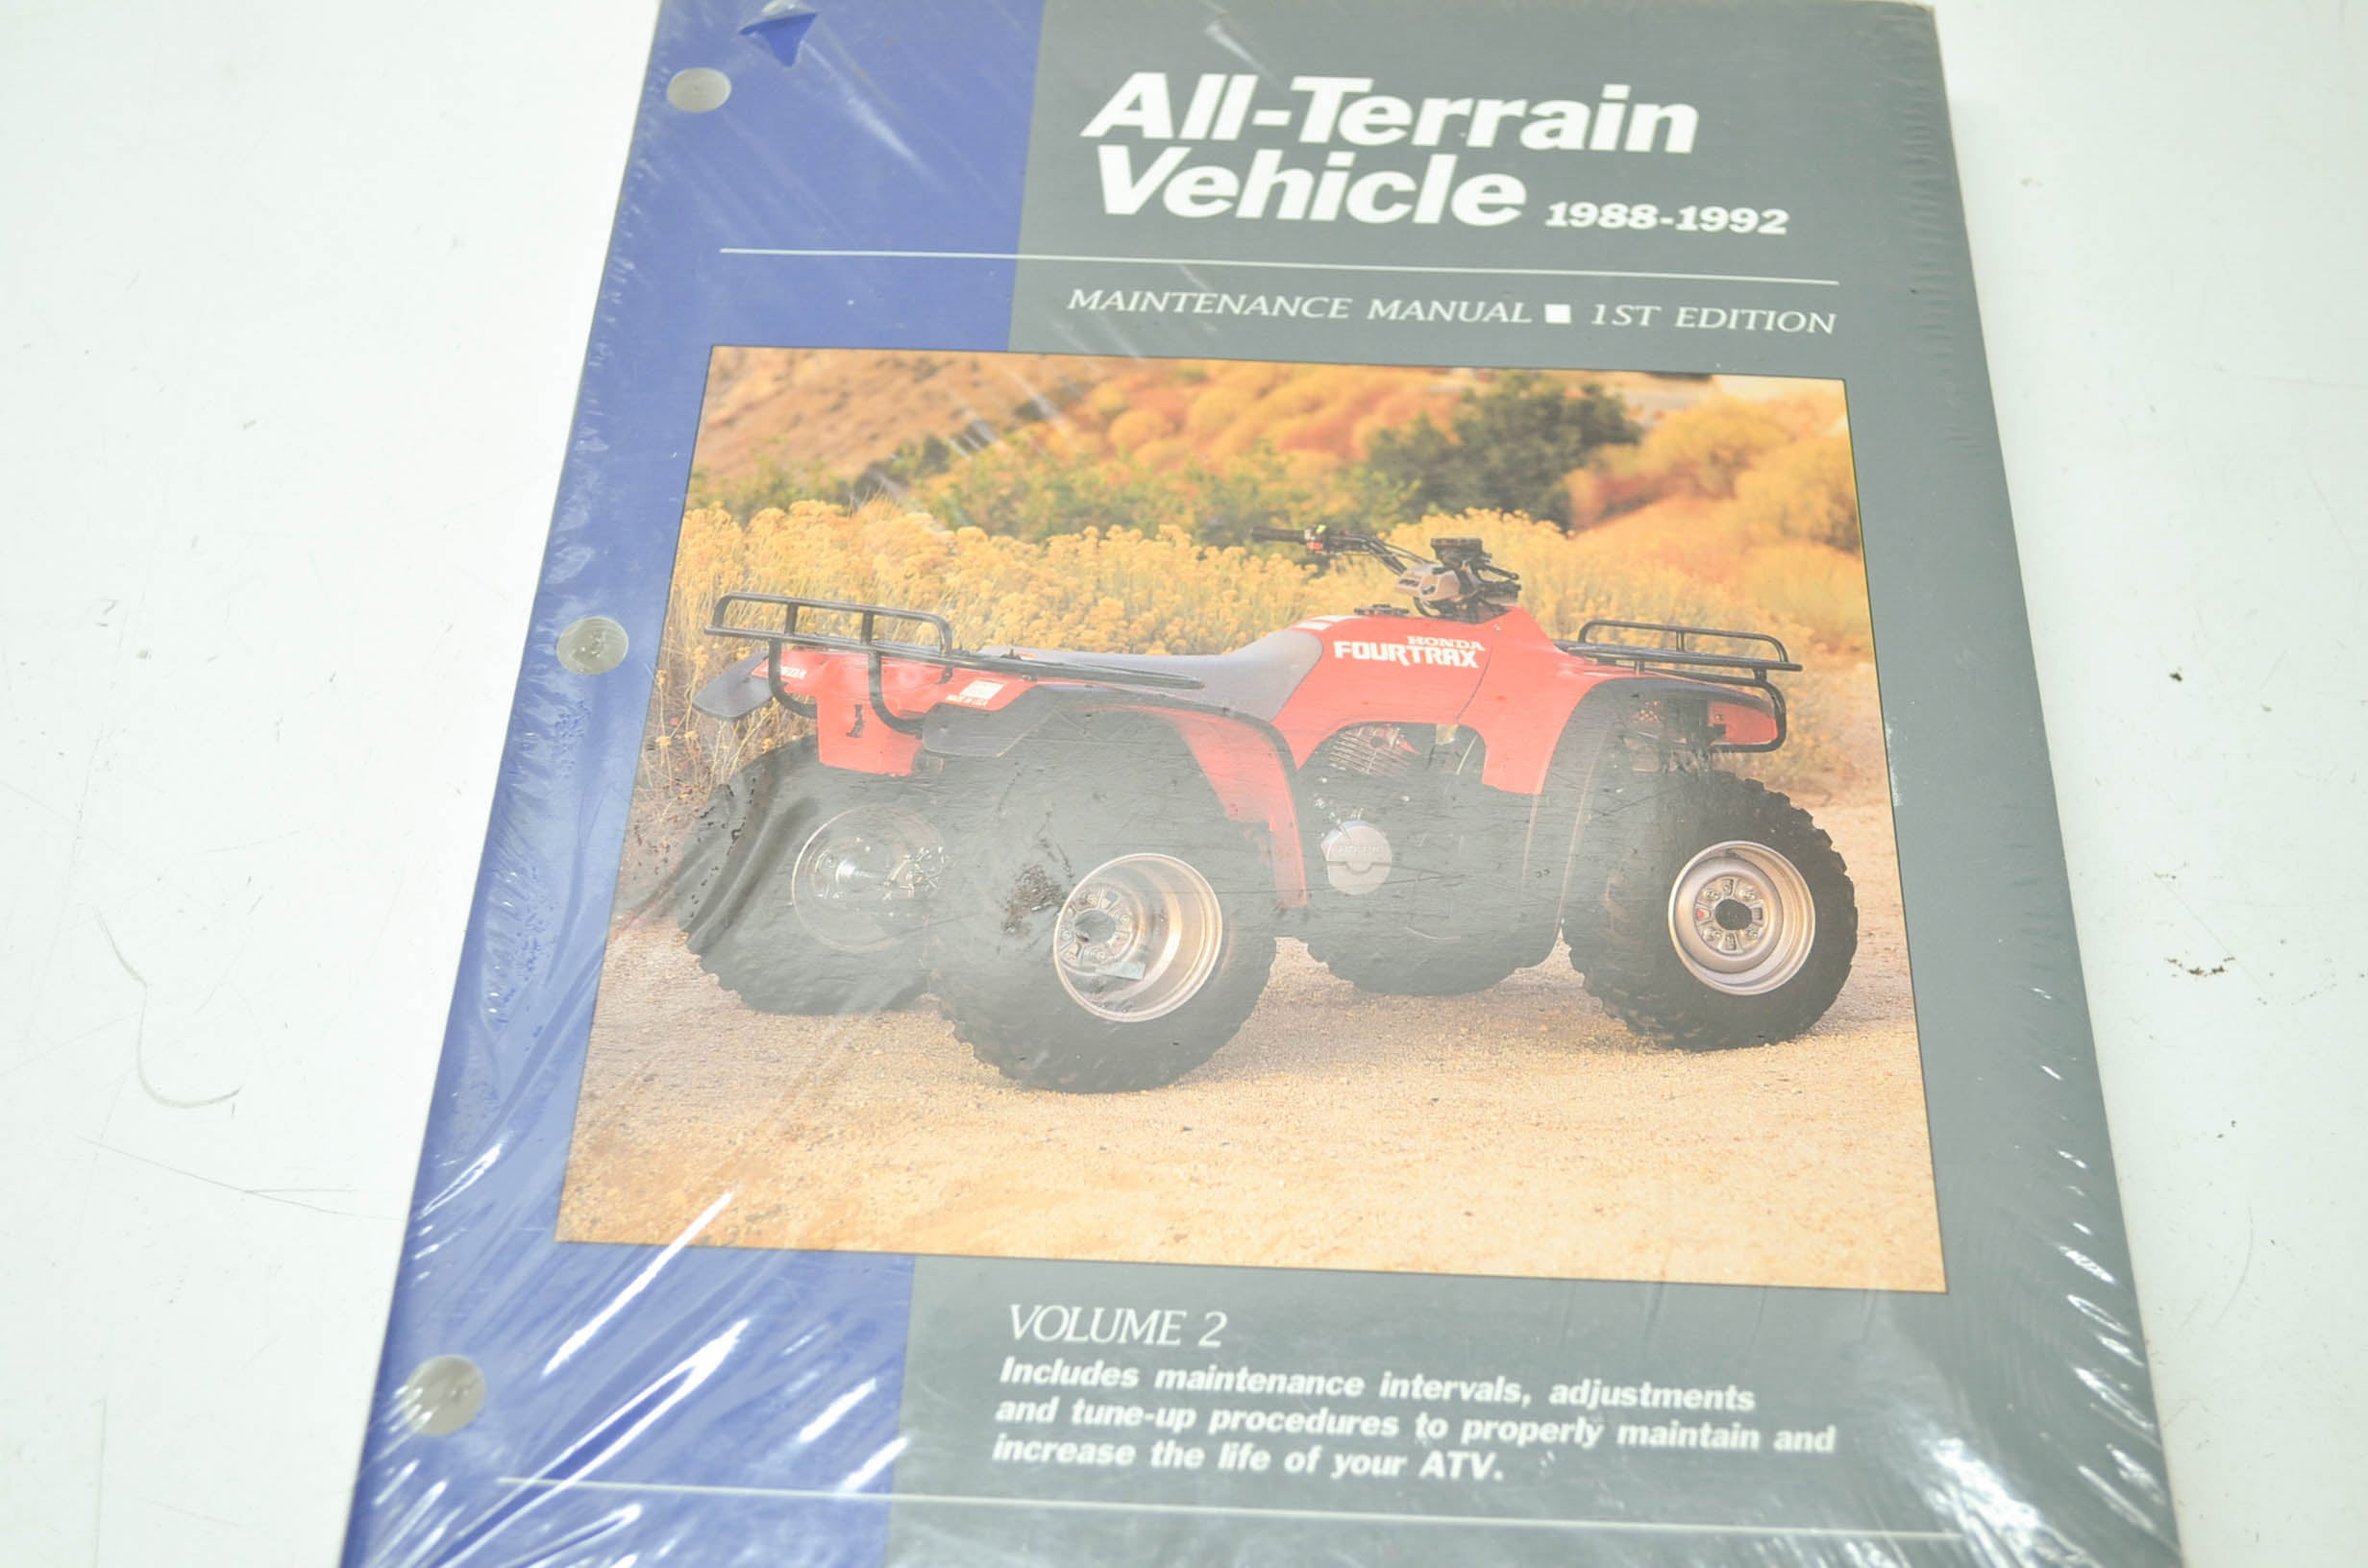 All Terrain Vehicle Service Manual Volume 2 Covers Major Brands 1988-1992 